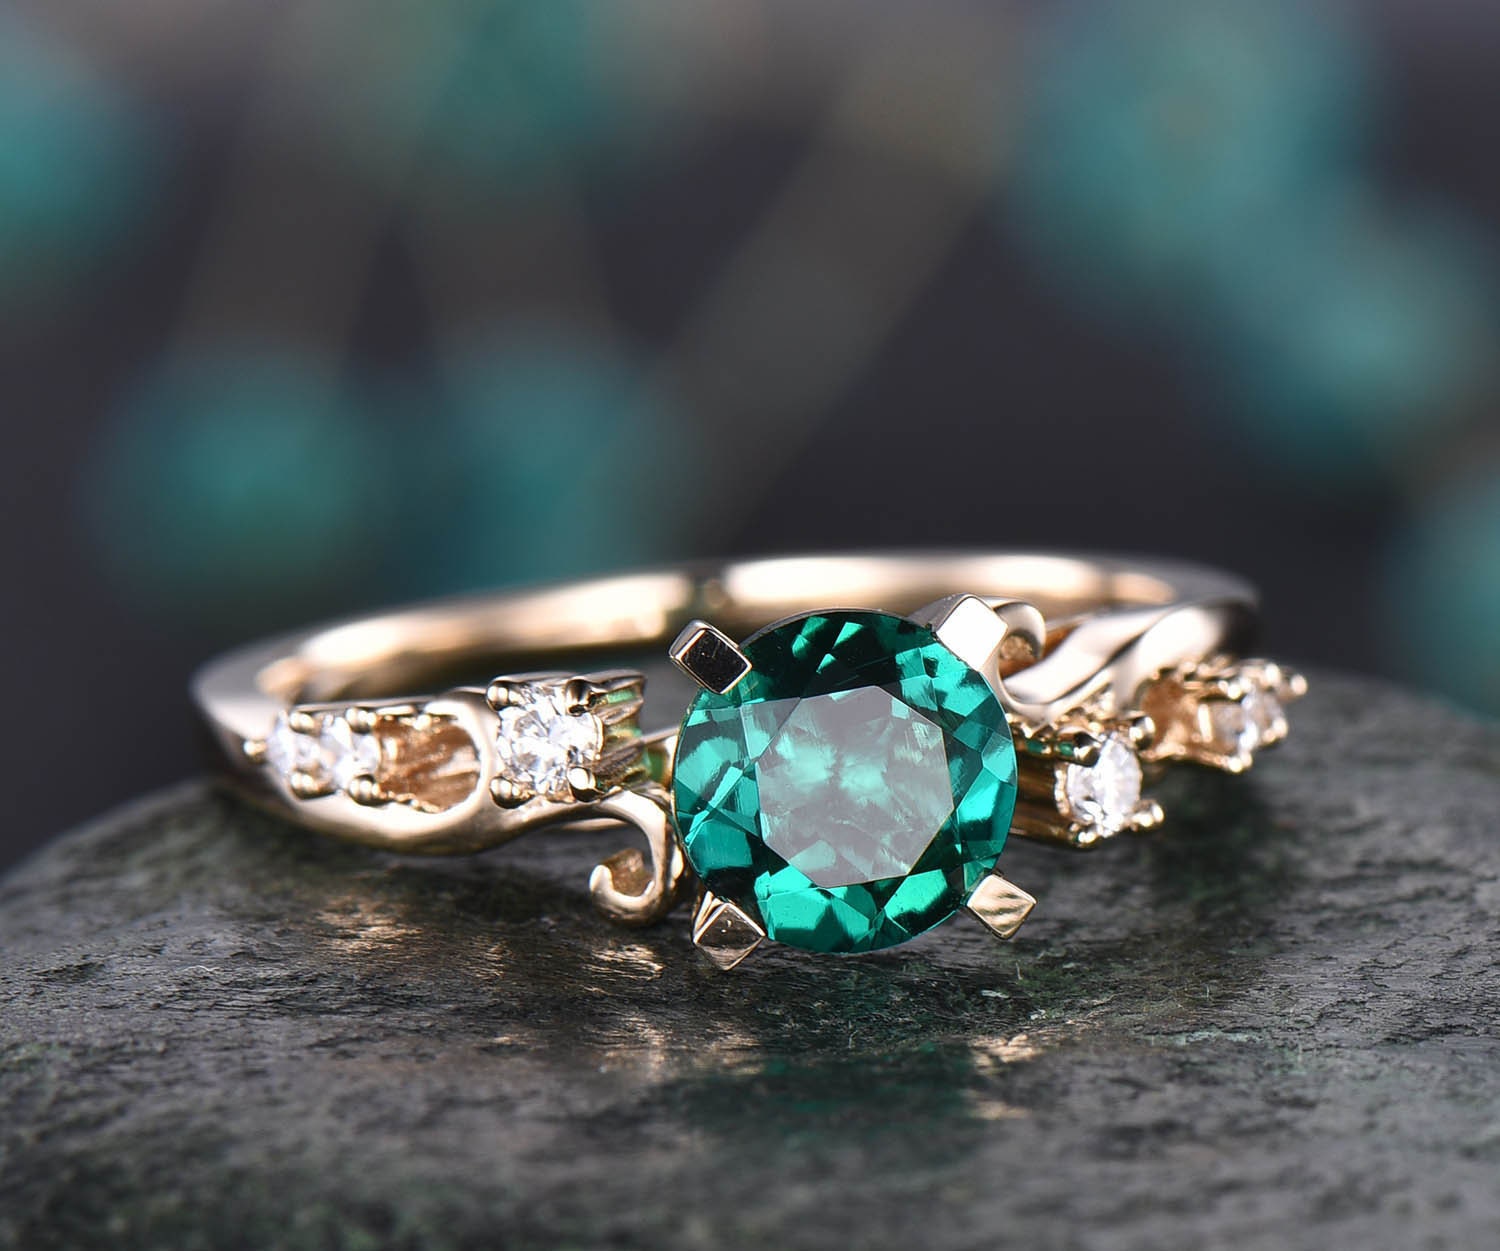 Kitty emerald and diamond engagement ring – The Vintage Ring Company